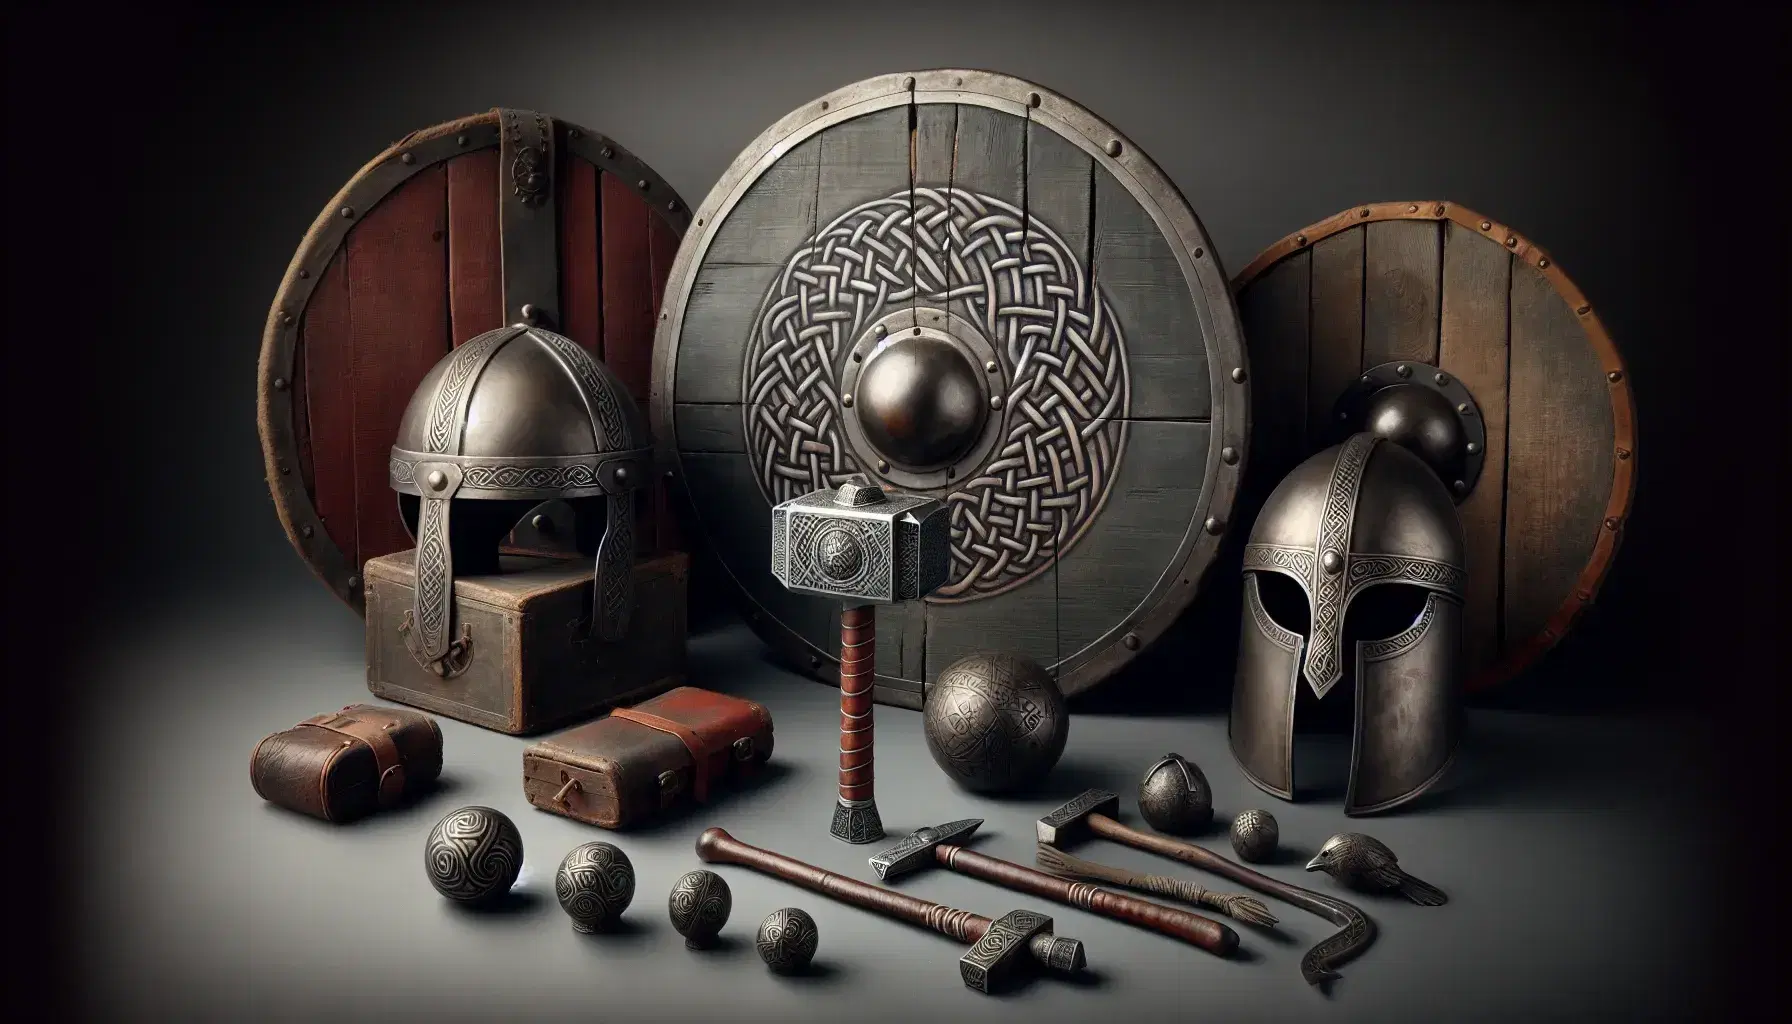 Viking artifacts including a Mjölnir pendant, red and black painted wooden shield, steel helmet, iron wrist guards, and carved animal figures on a grey background.